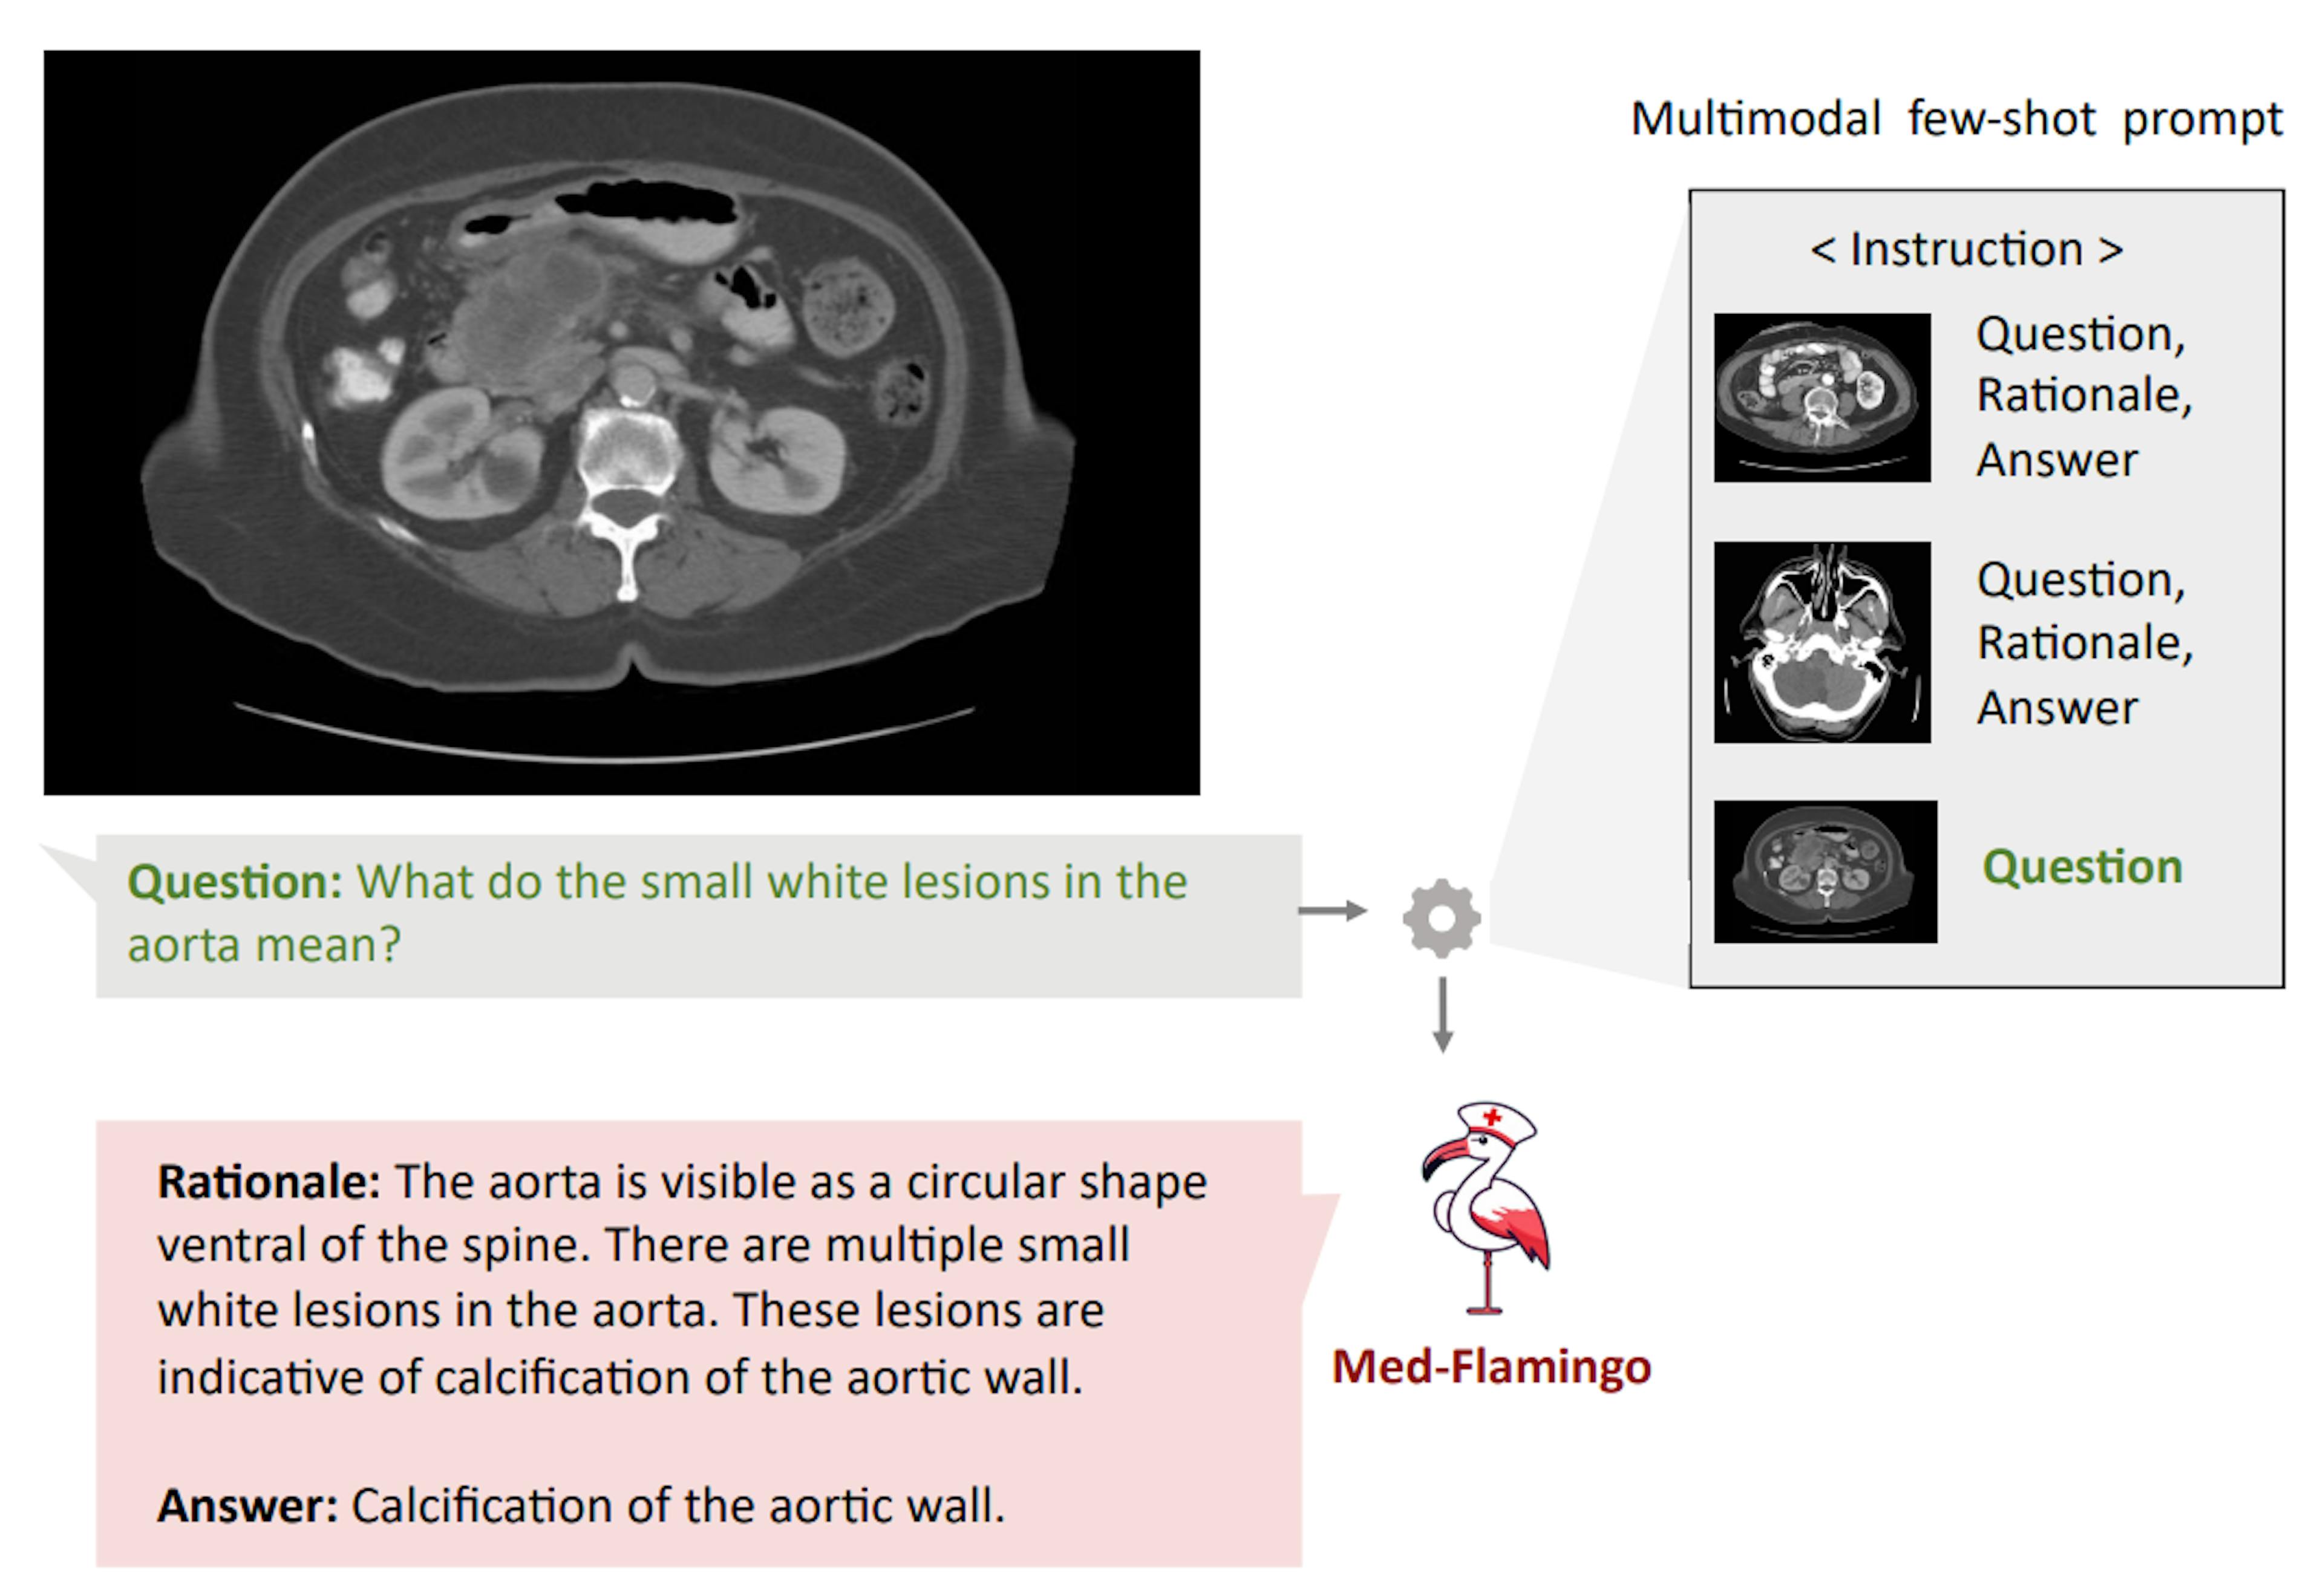 Figure 5: Multimodal medical few-shot prompting illustrated with an example. Few-shot prompting here allows users to customize the response format, e.g., to provide rationales for the provided answers. In addition, multimodal few-shot prompts potentially offer the ability to include relevant context retrieved from the medical literature.